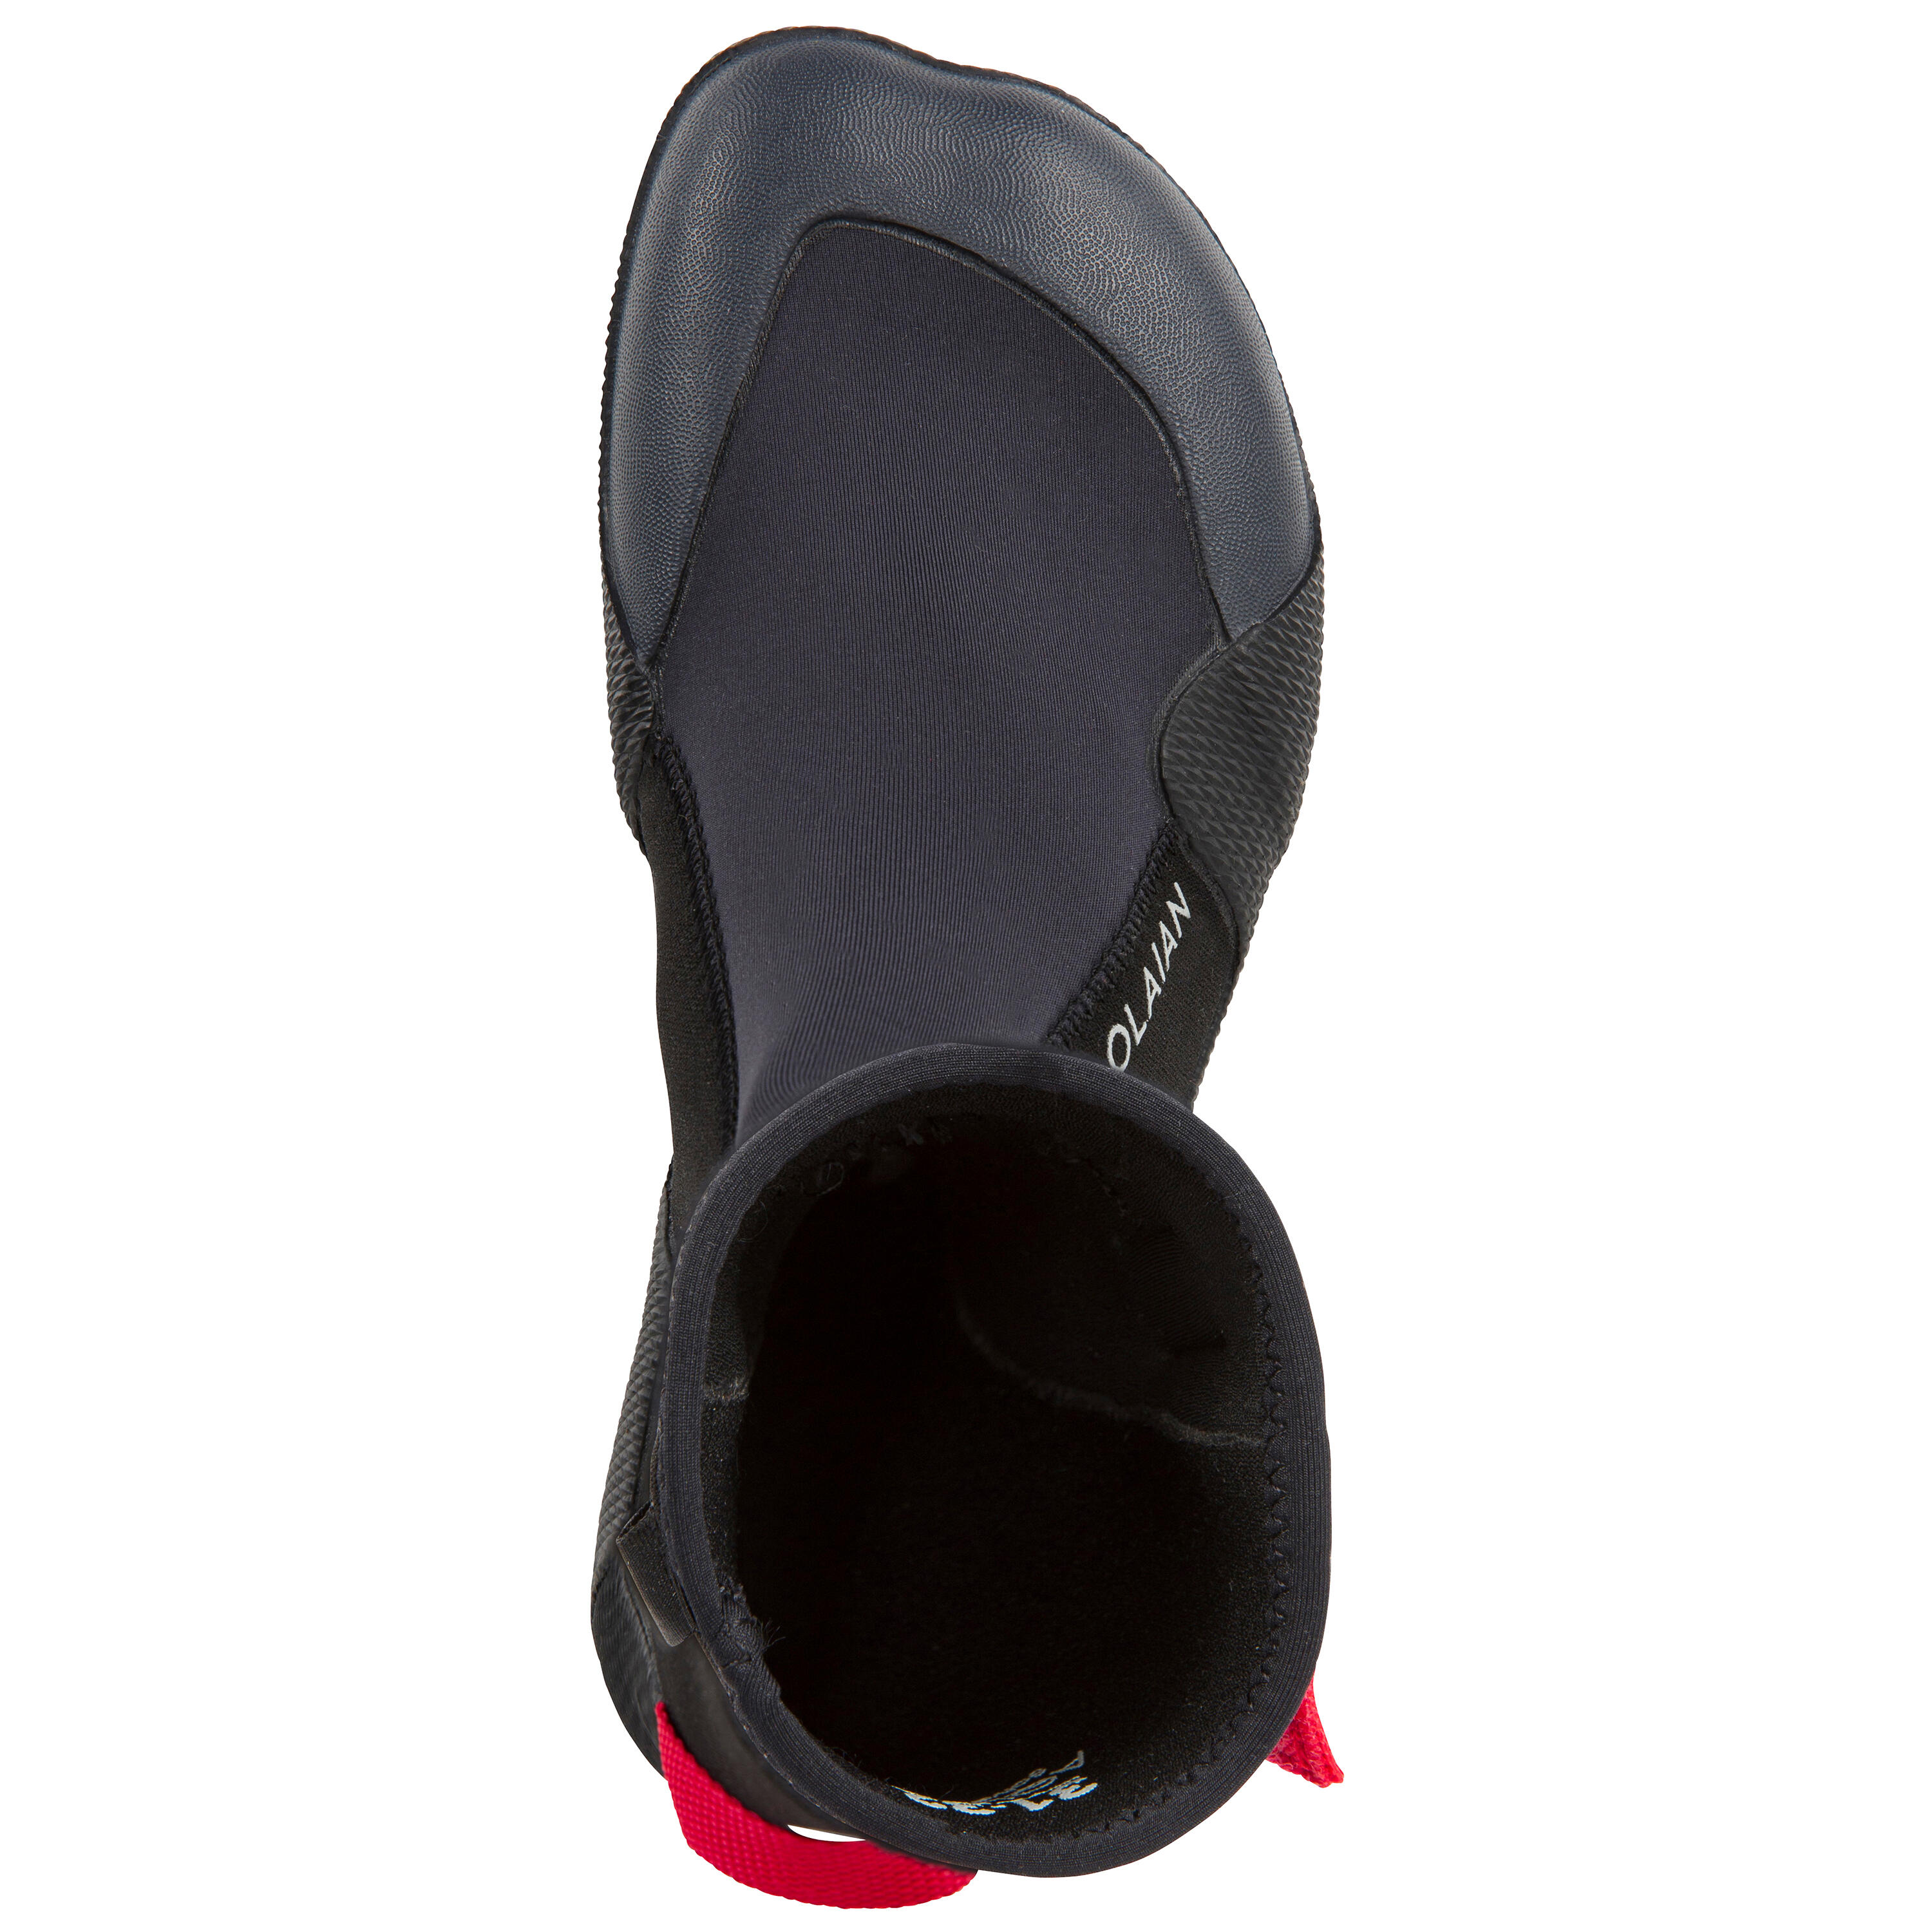 Kids' shoes 500 3 mm - black/red 5/8